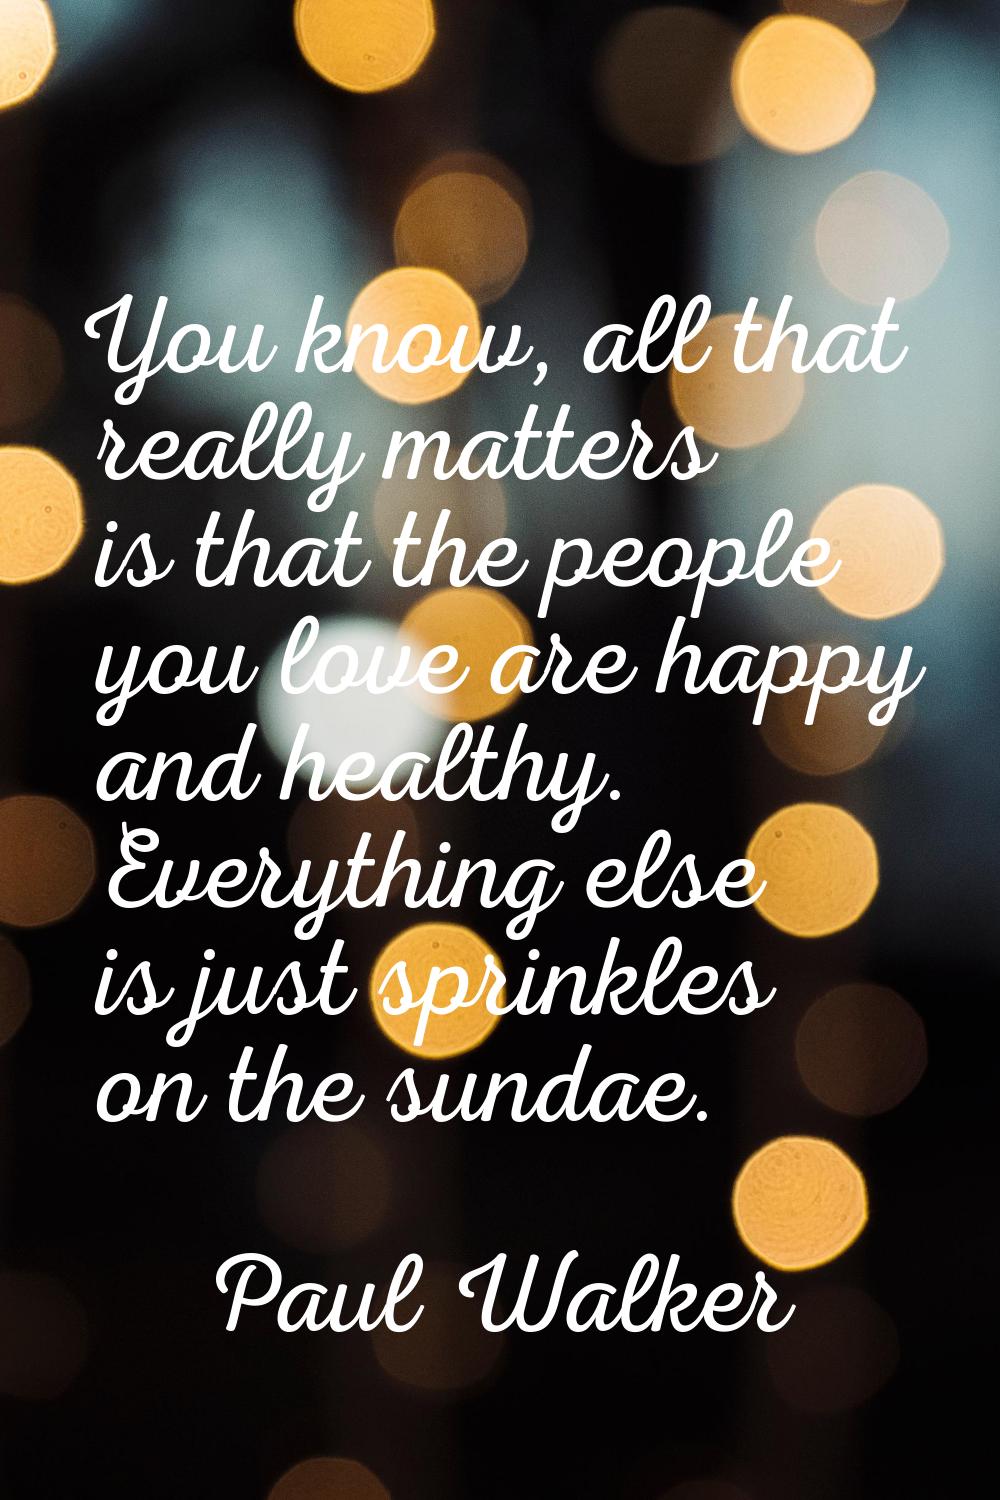 You know, all that really matters is that the people you love are happy and healthy. Everything els